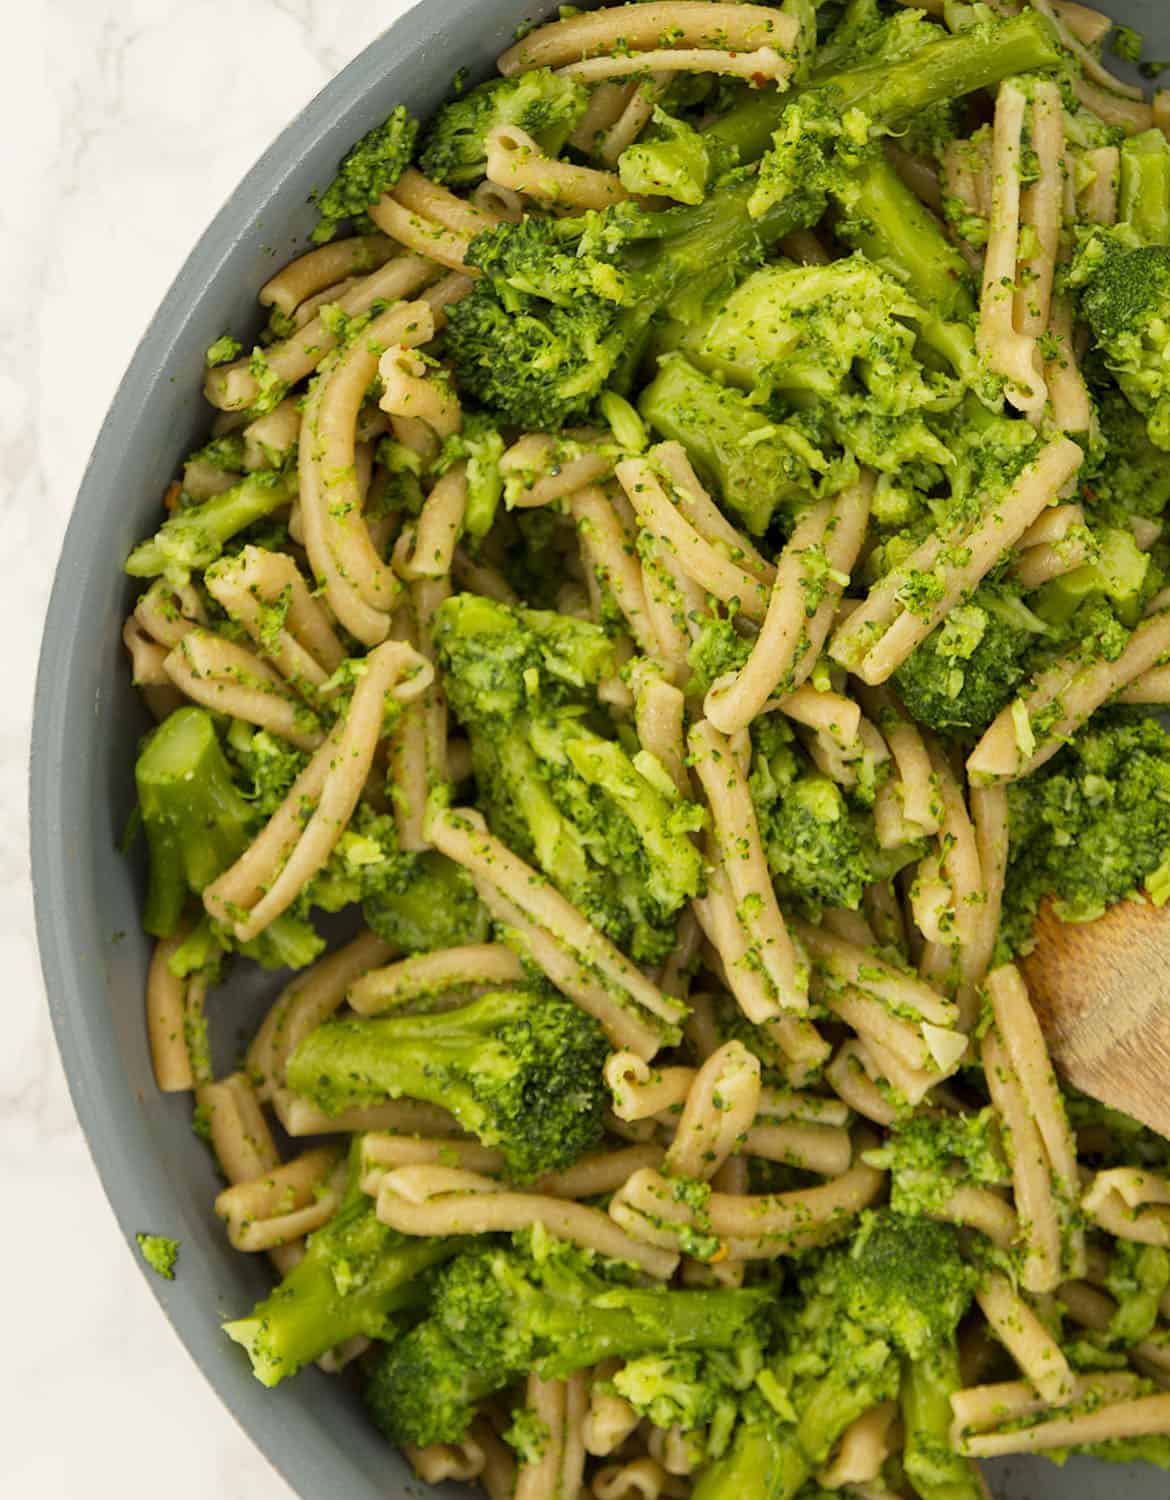 The broccoli pasta is stirred in a grey pan with a wooden spoon.